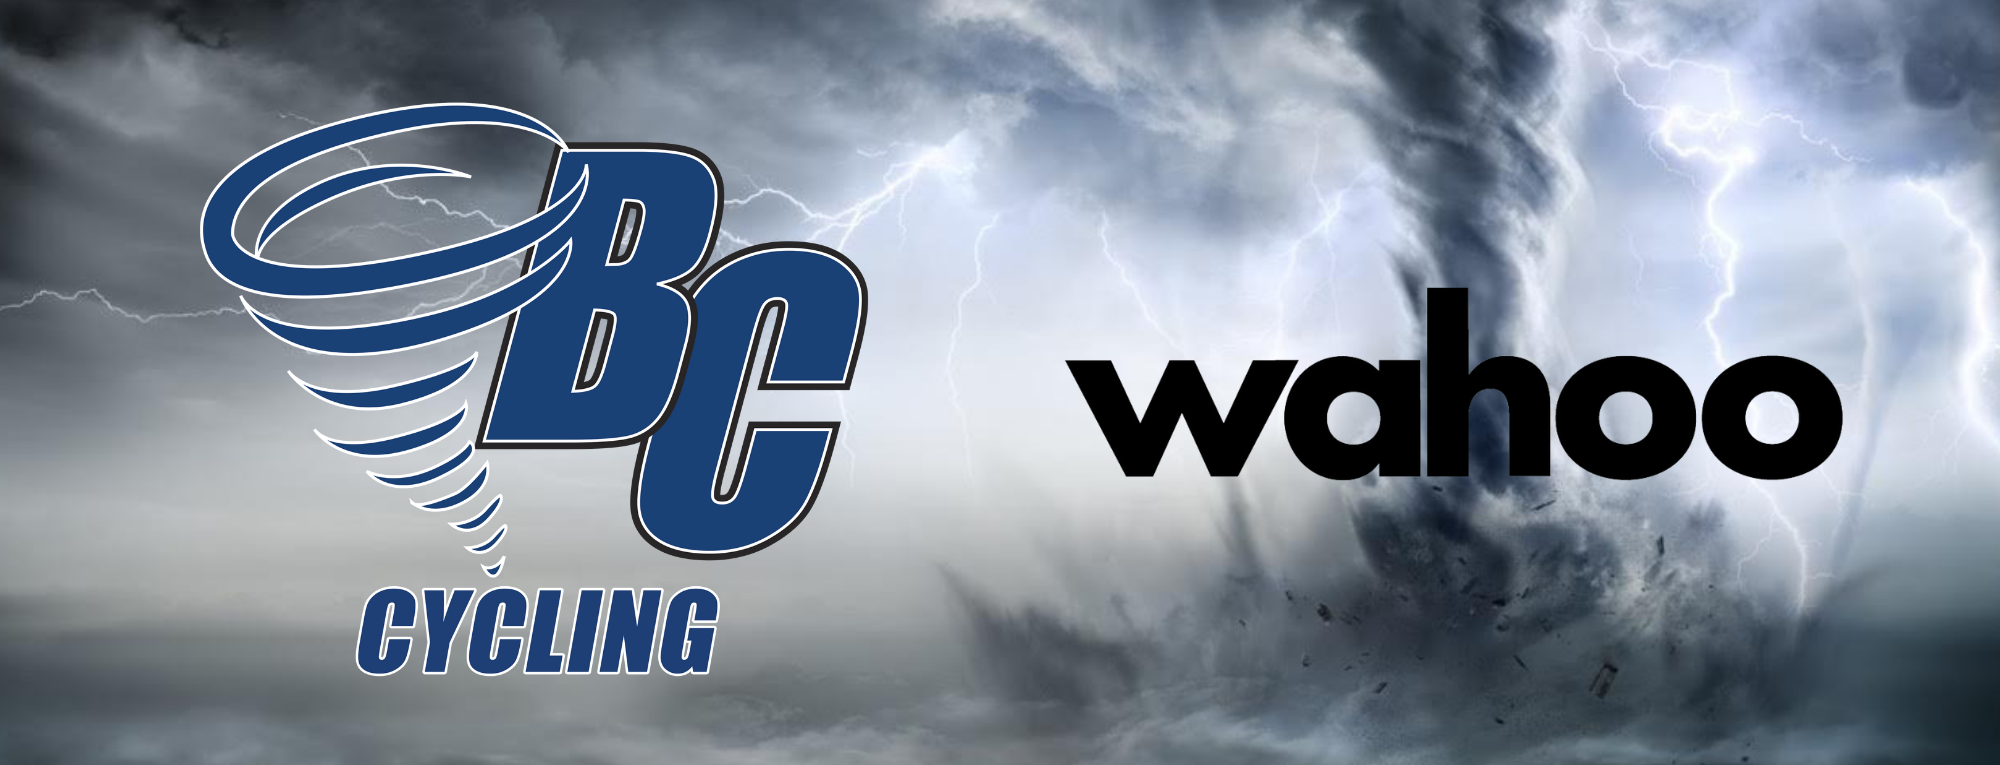 Brevard College Cycling and Wahoo Fitness Begin Partnership, Open Training Center